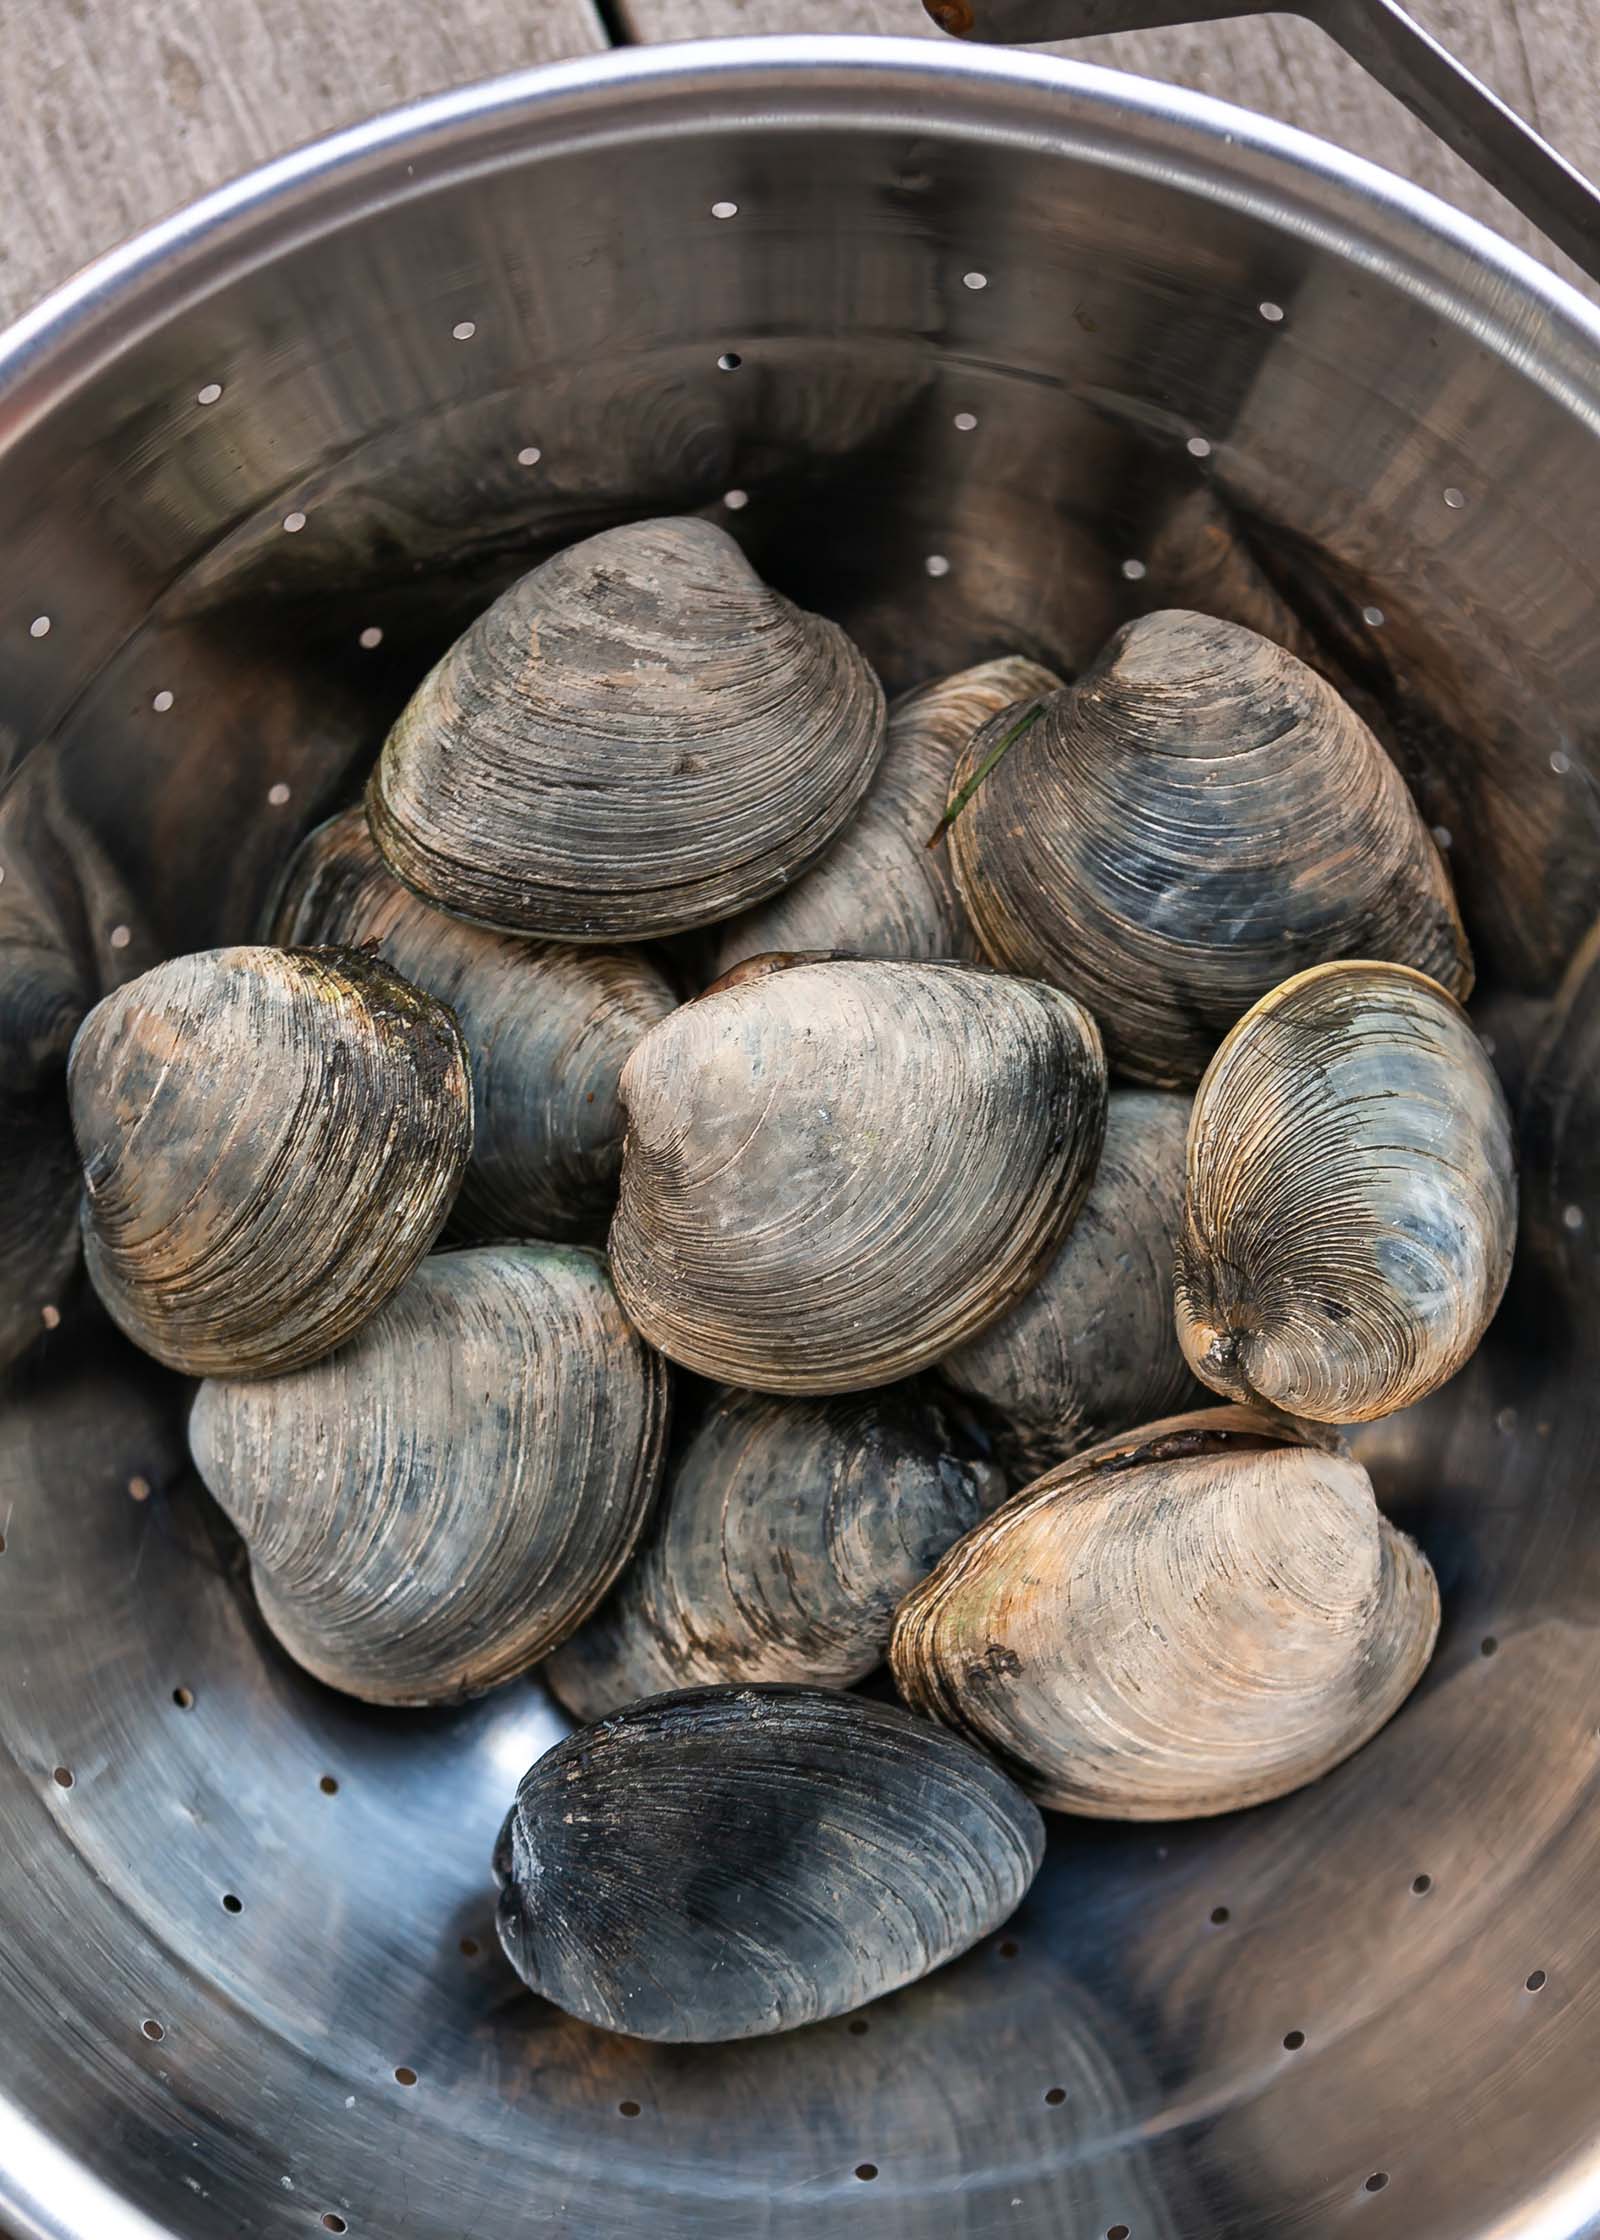 Live clams in a colander. A Cook’s Guide to Buying, Storing and Cooking Clams.